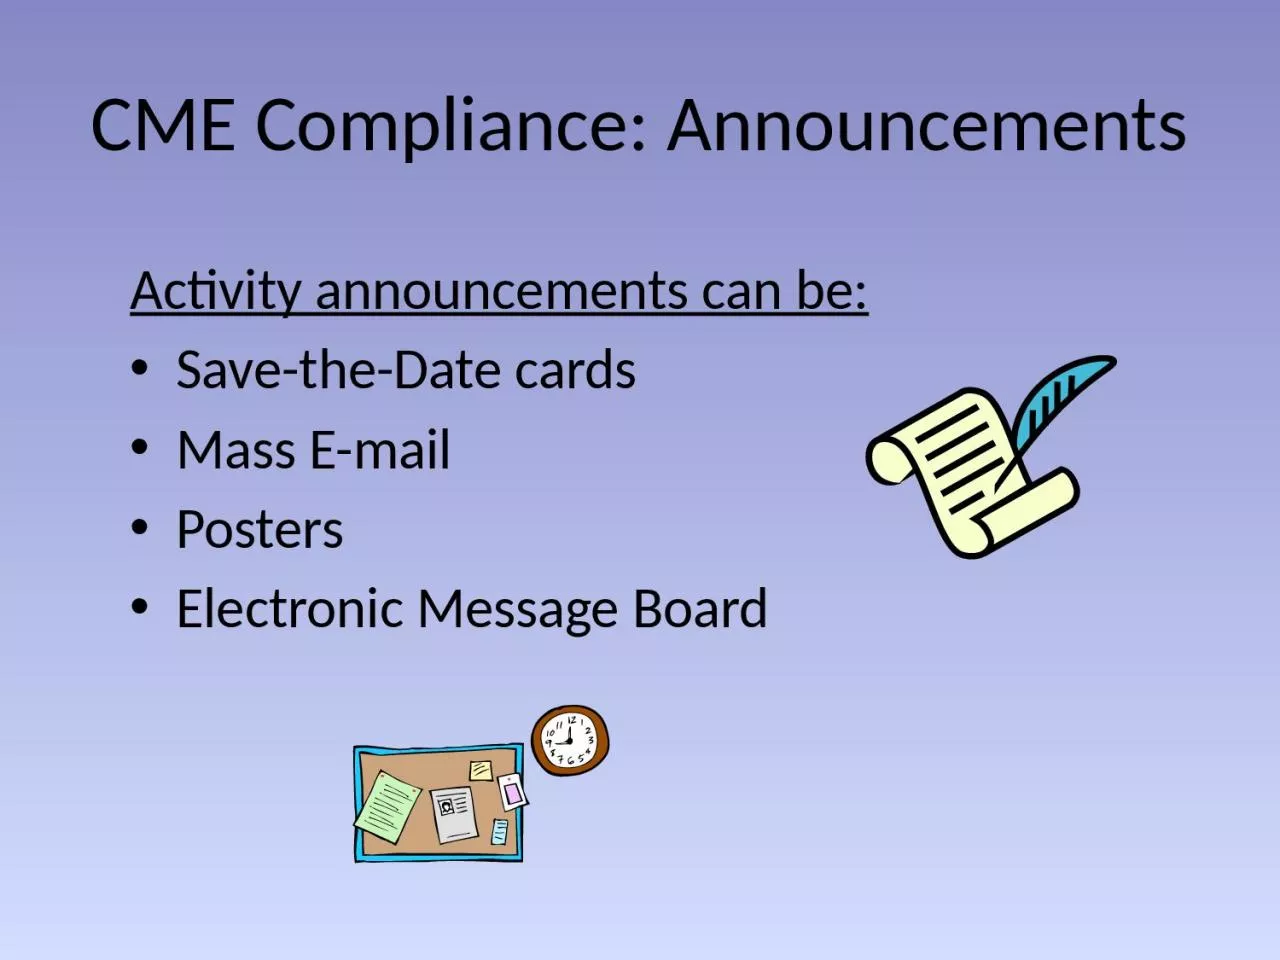 Activity announcements can be: